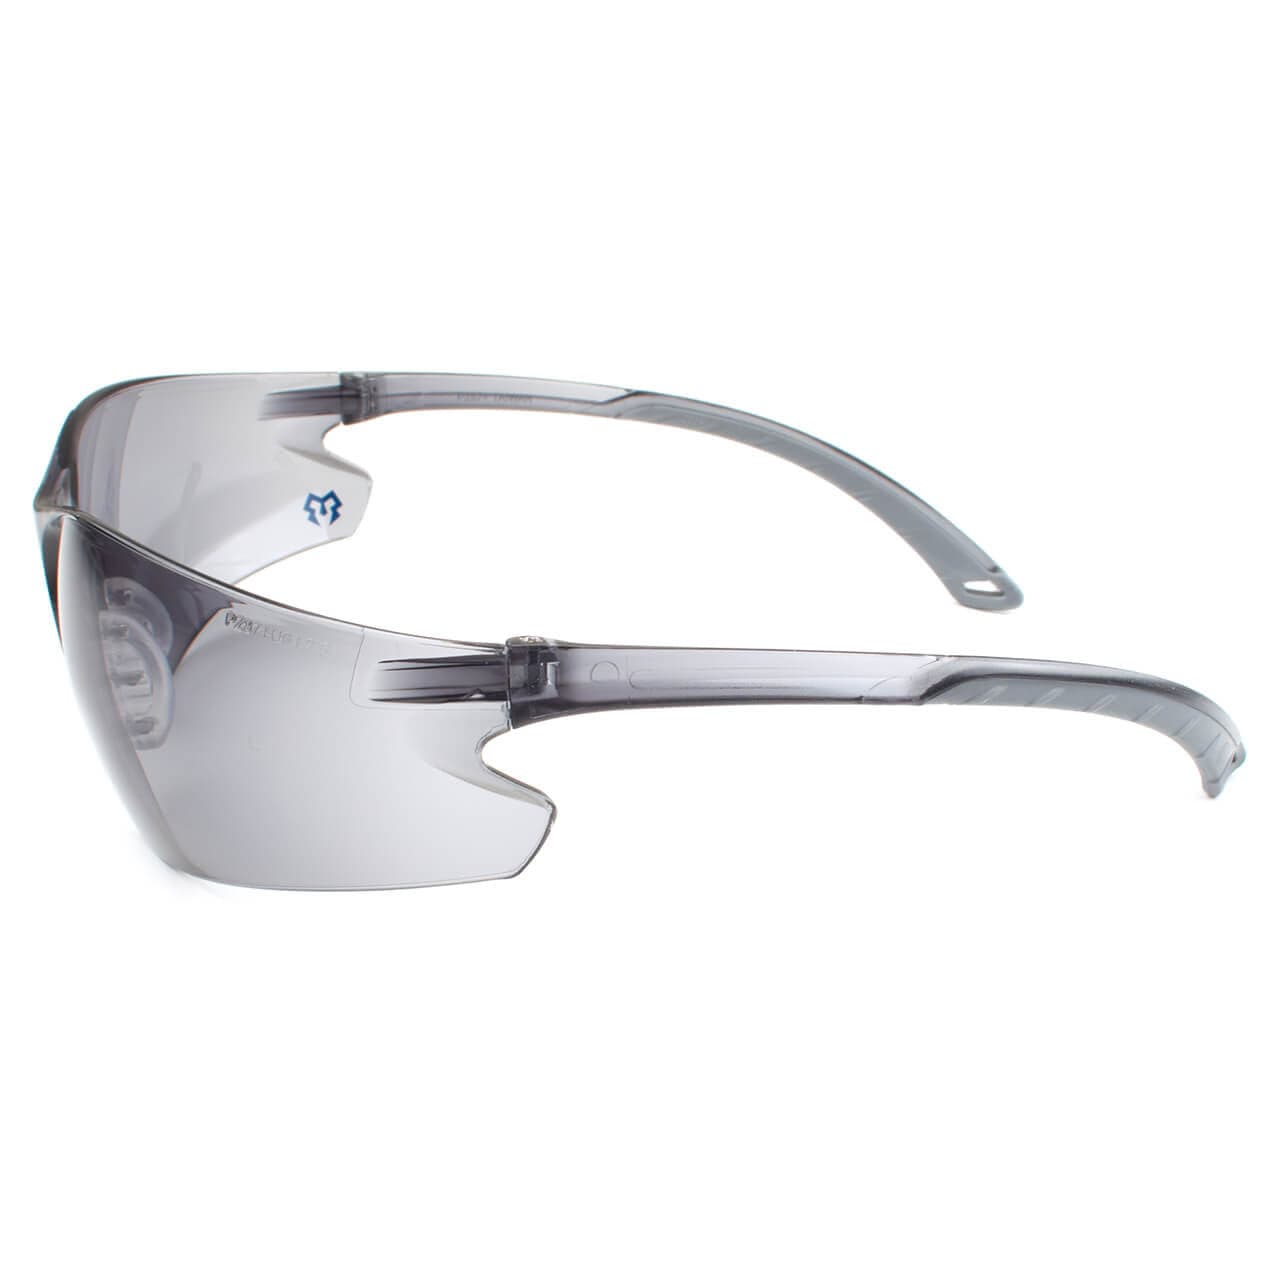 Metel M20 Safety Glasses with Gray Anti-Fog Lenses Side View